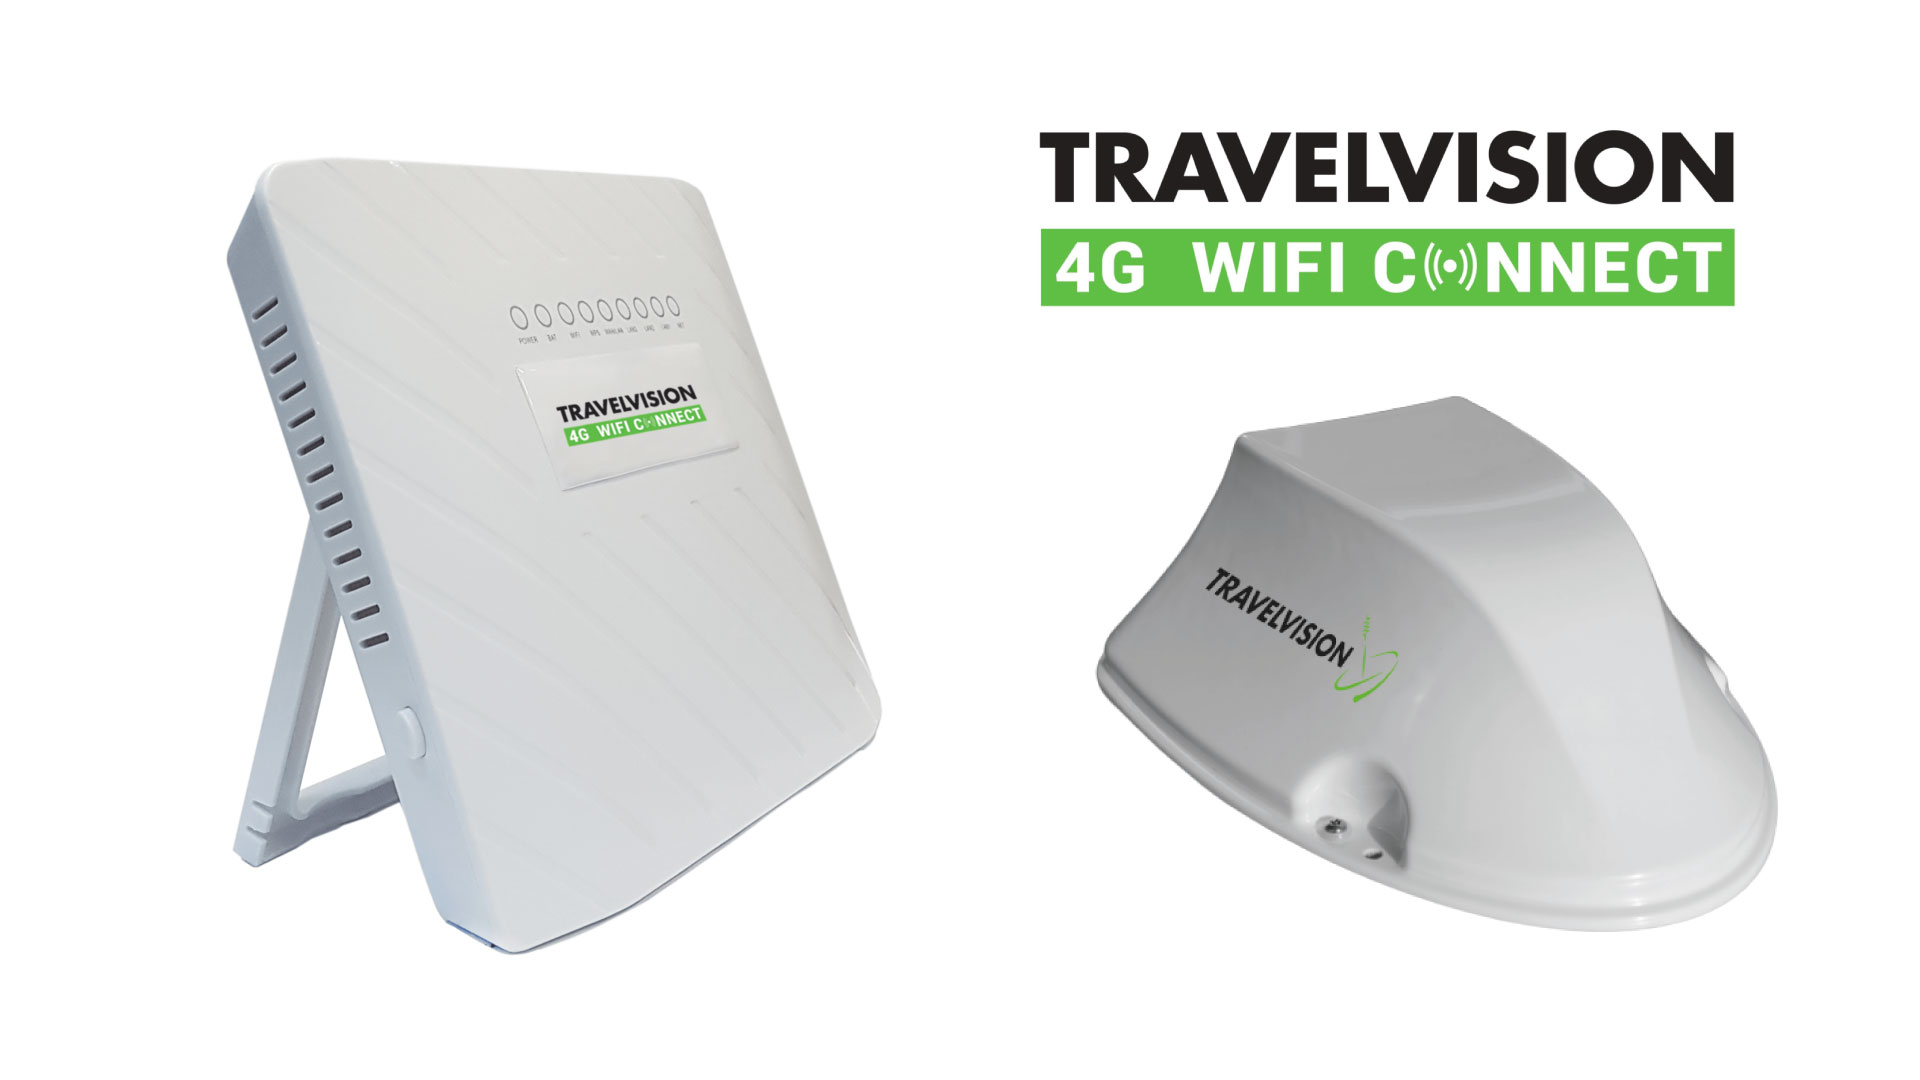 Travel Vision 4G wifi connect